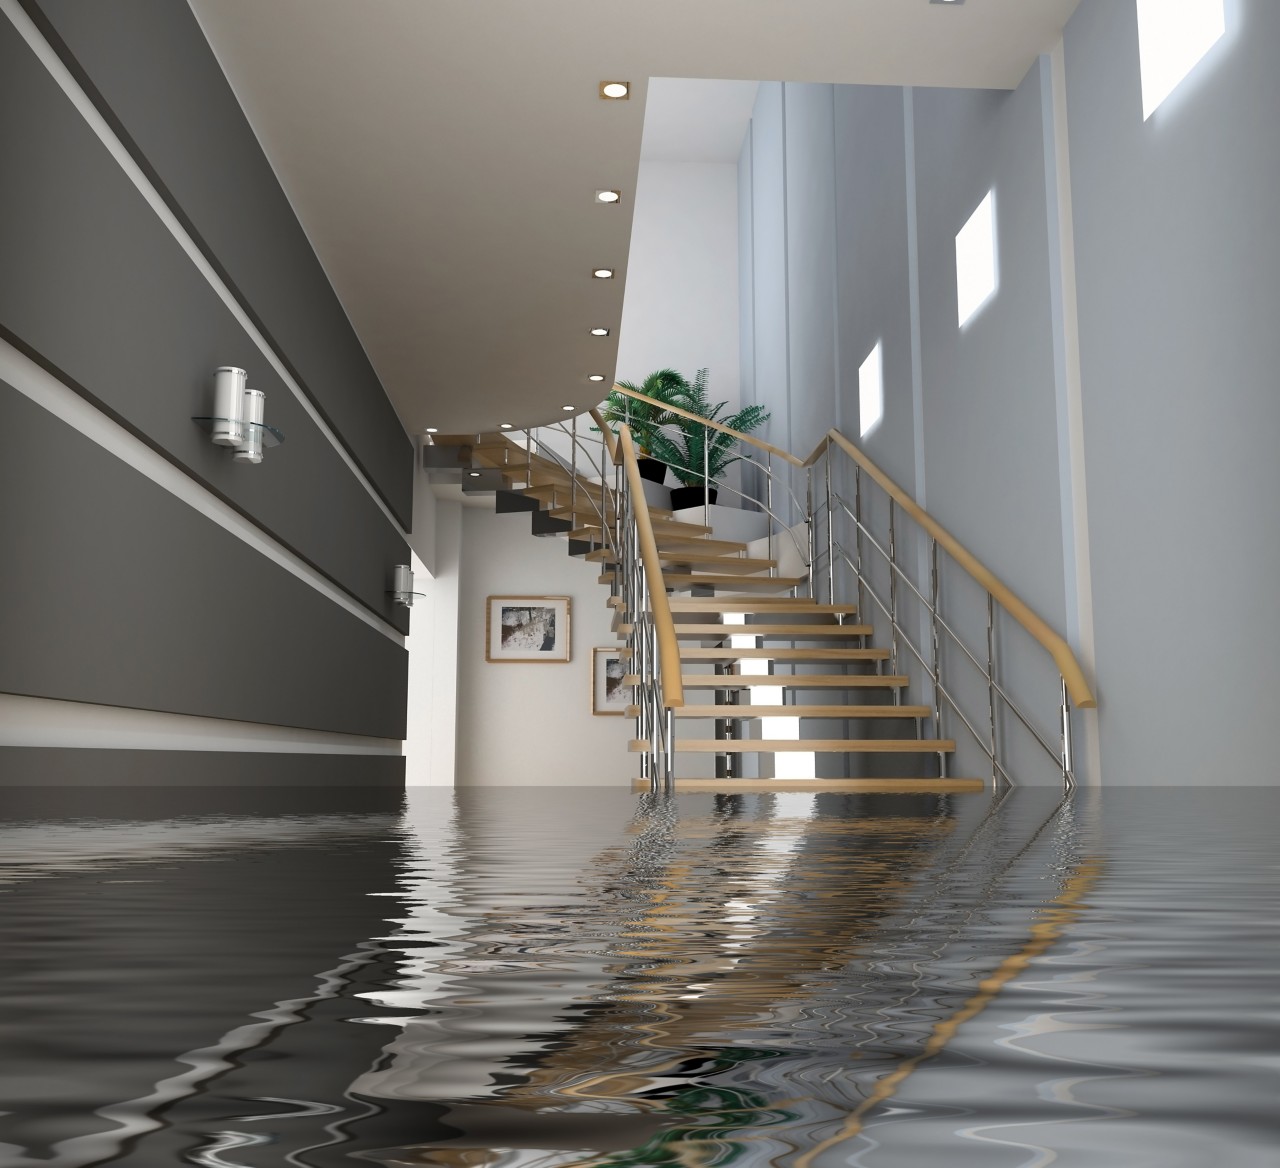 Basement flood with staircase